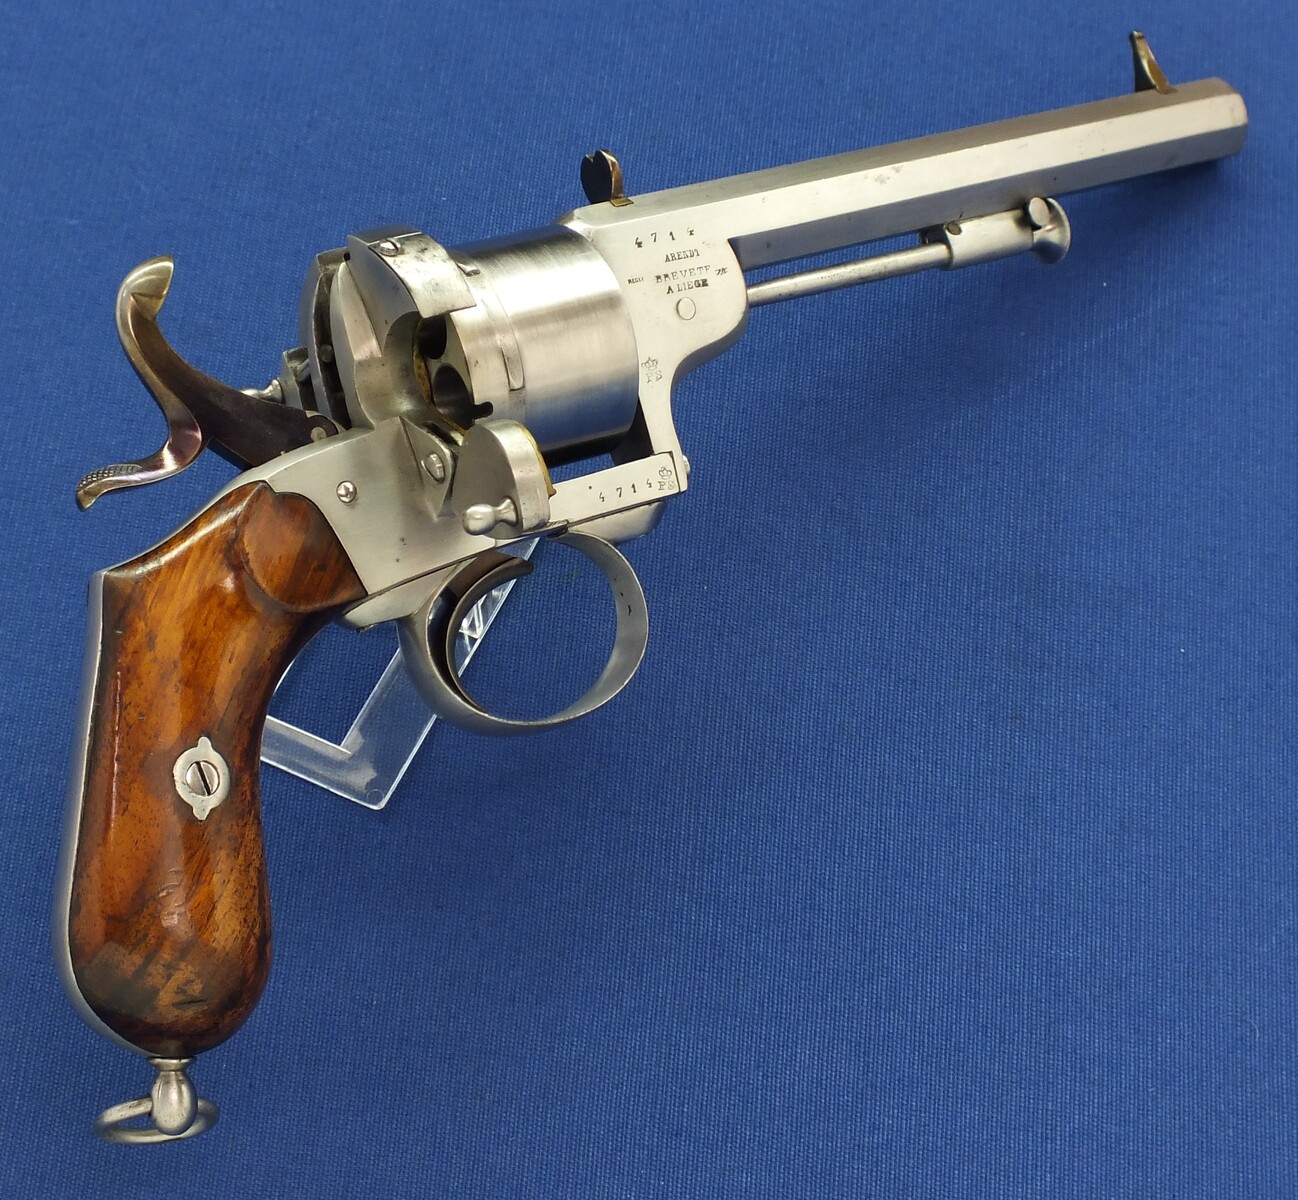 An Antique Dutch Officers Arendt Brevete Liege 6 shot Double and Single Action 12mm Pinfire Revolver Inspected by P. Stevens Maastricht. Lenght 30cm. In very good condition. Price 1.550 euro